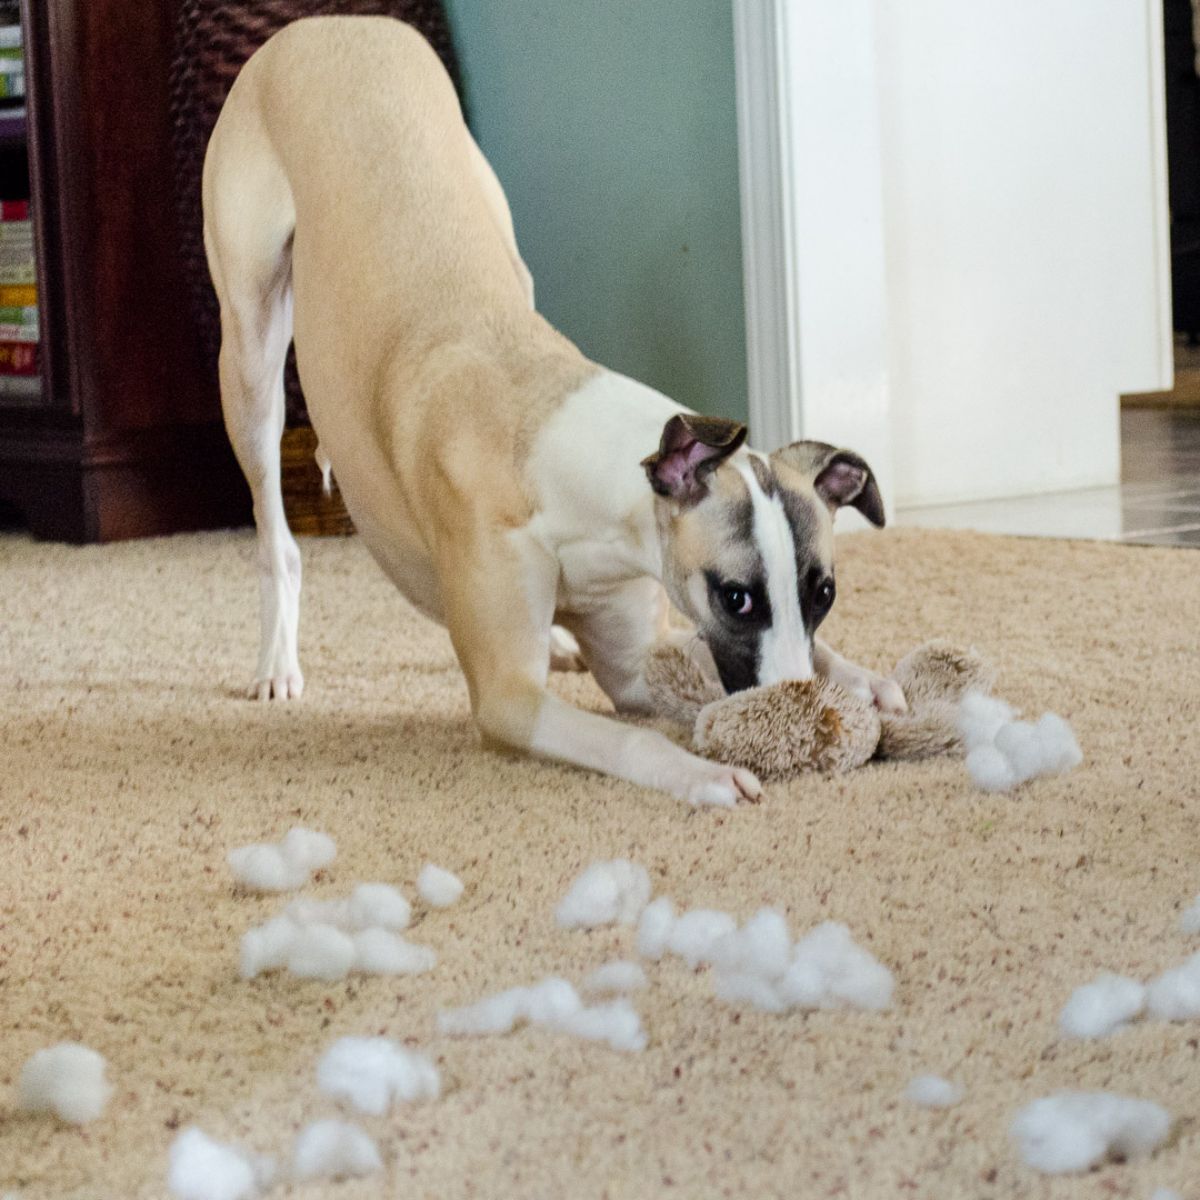 brown and white dog ripping a brown stuffed toy with white stuffing on the floor